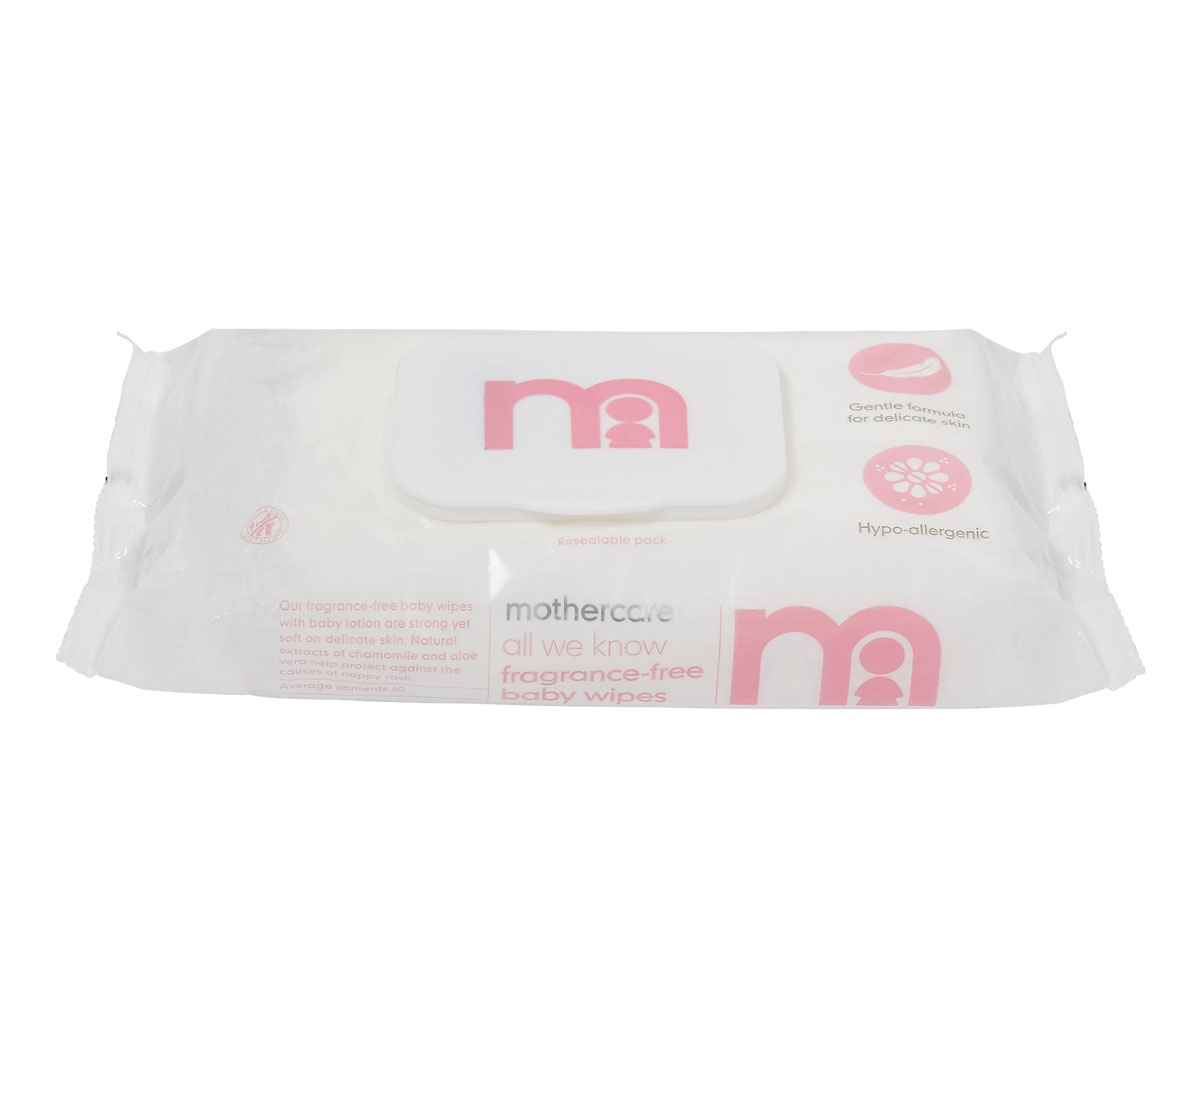 Mothercare | Mothercare All We Know Non-Fragranced Baby Wipes Pack of 60 0